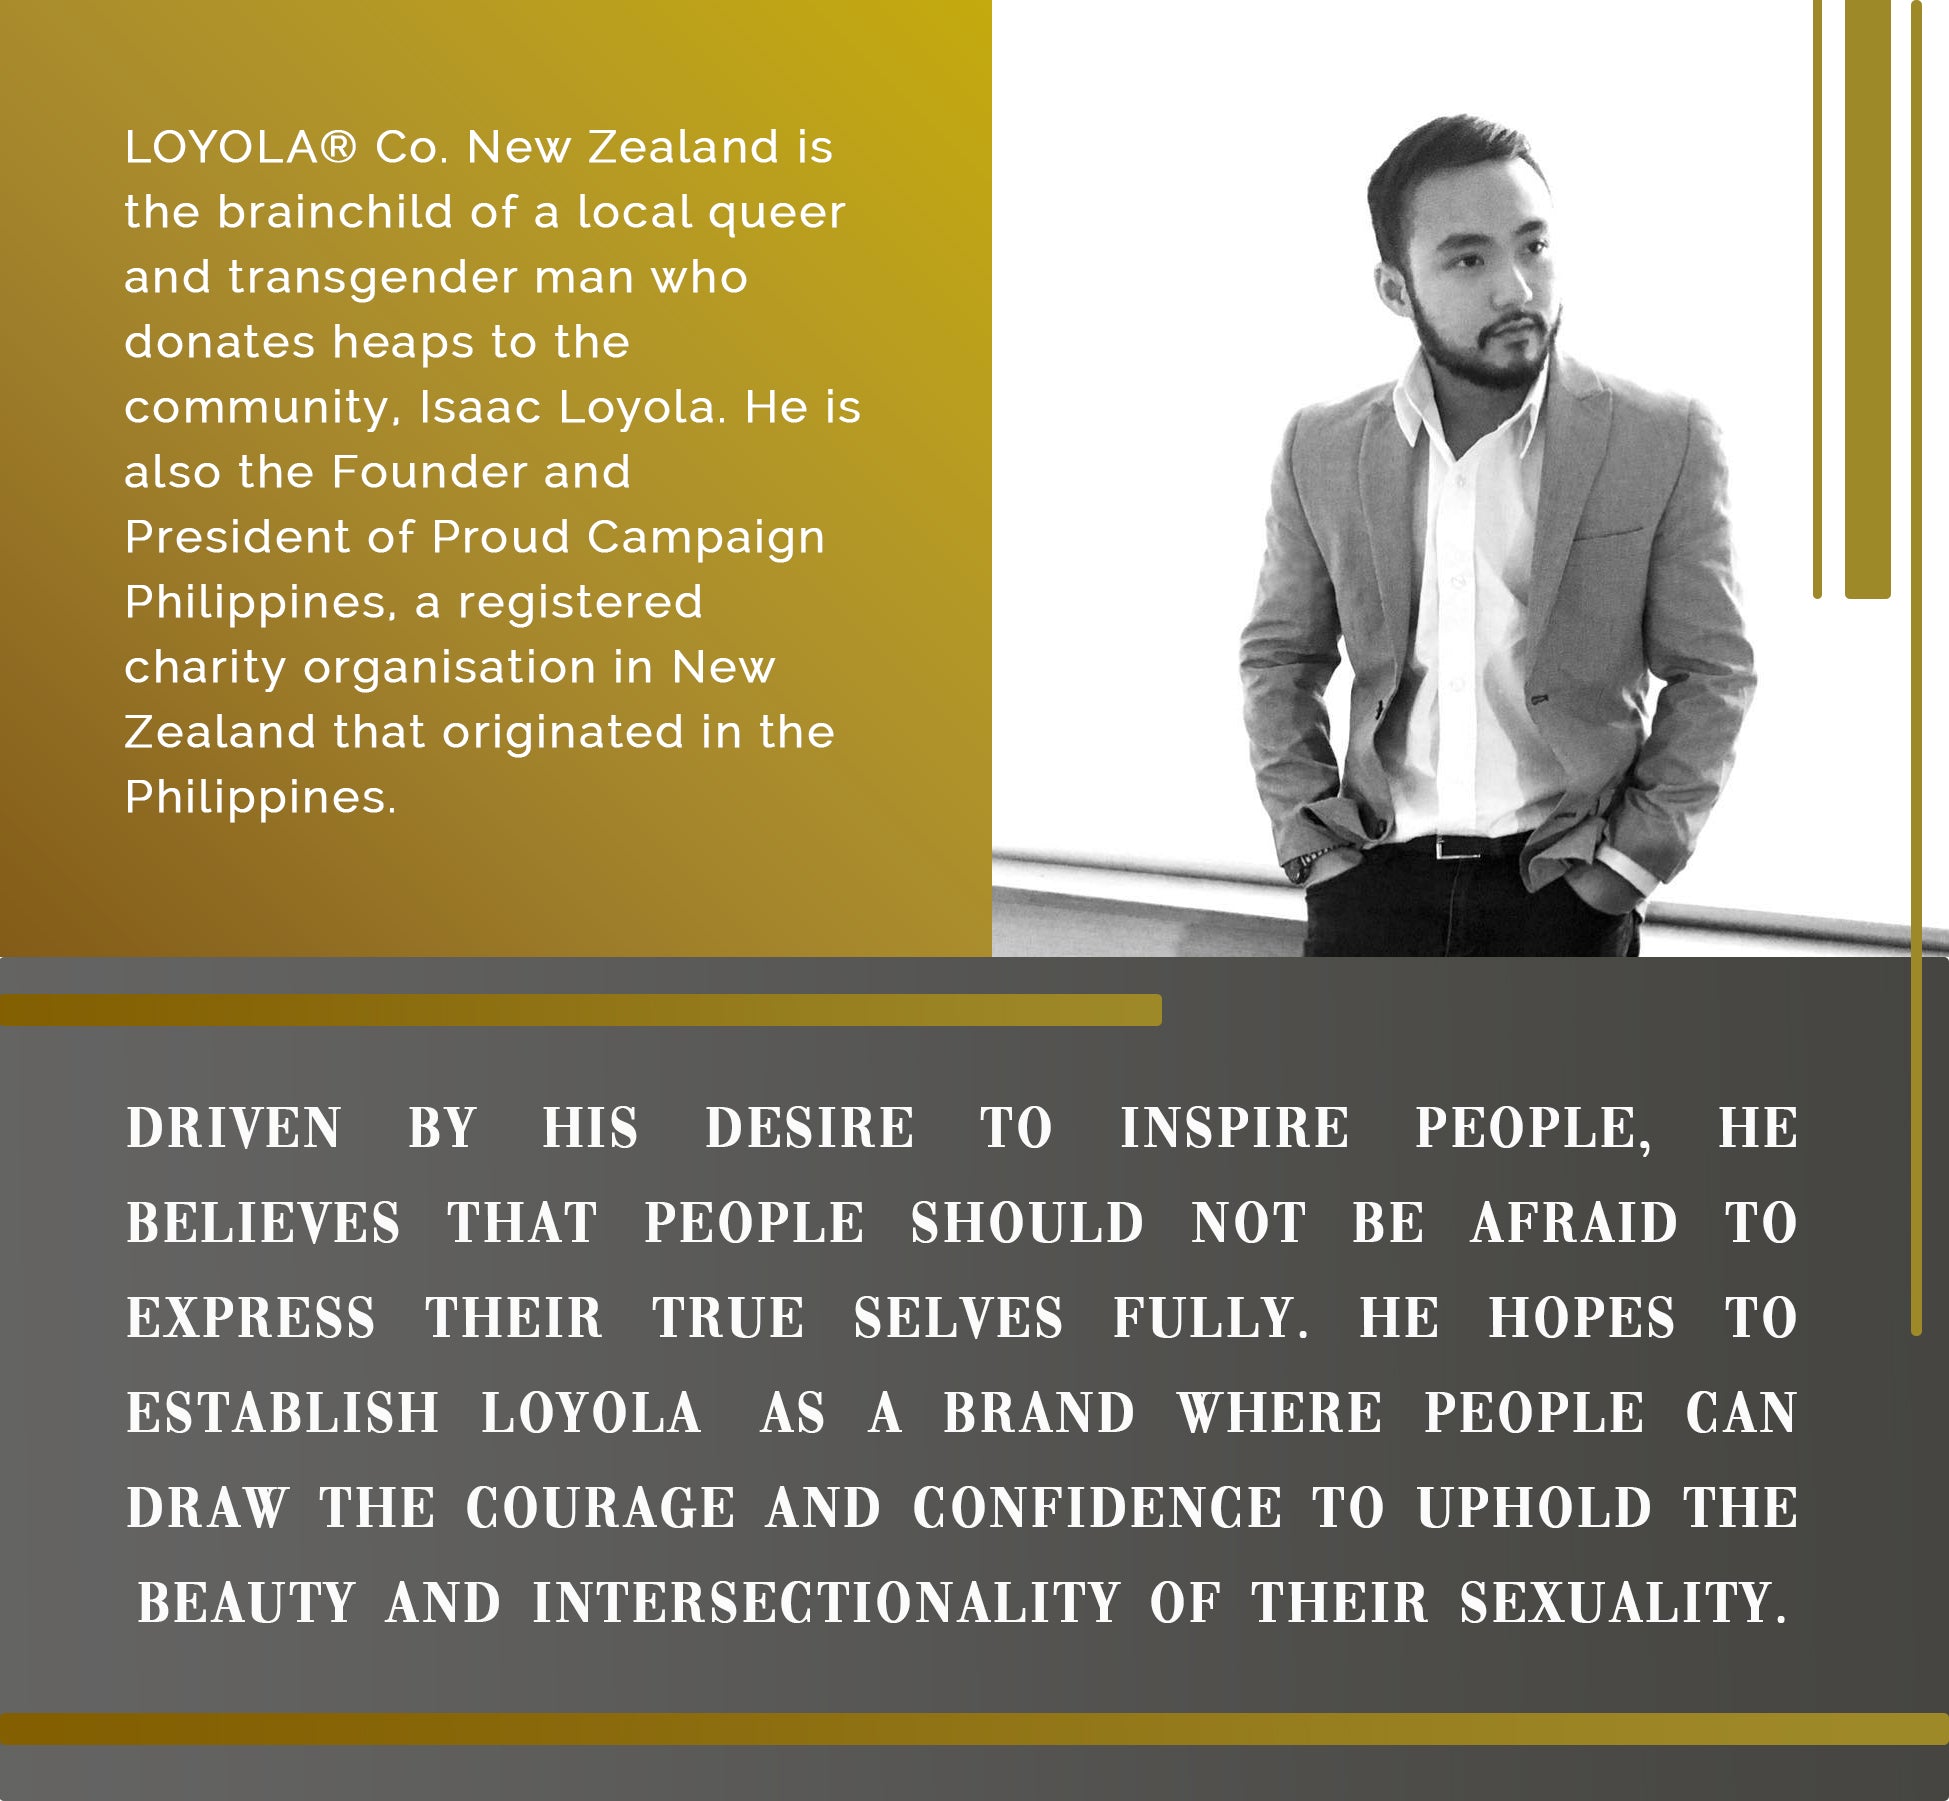 Isaac Loyola | Owner and Creative Director